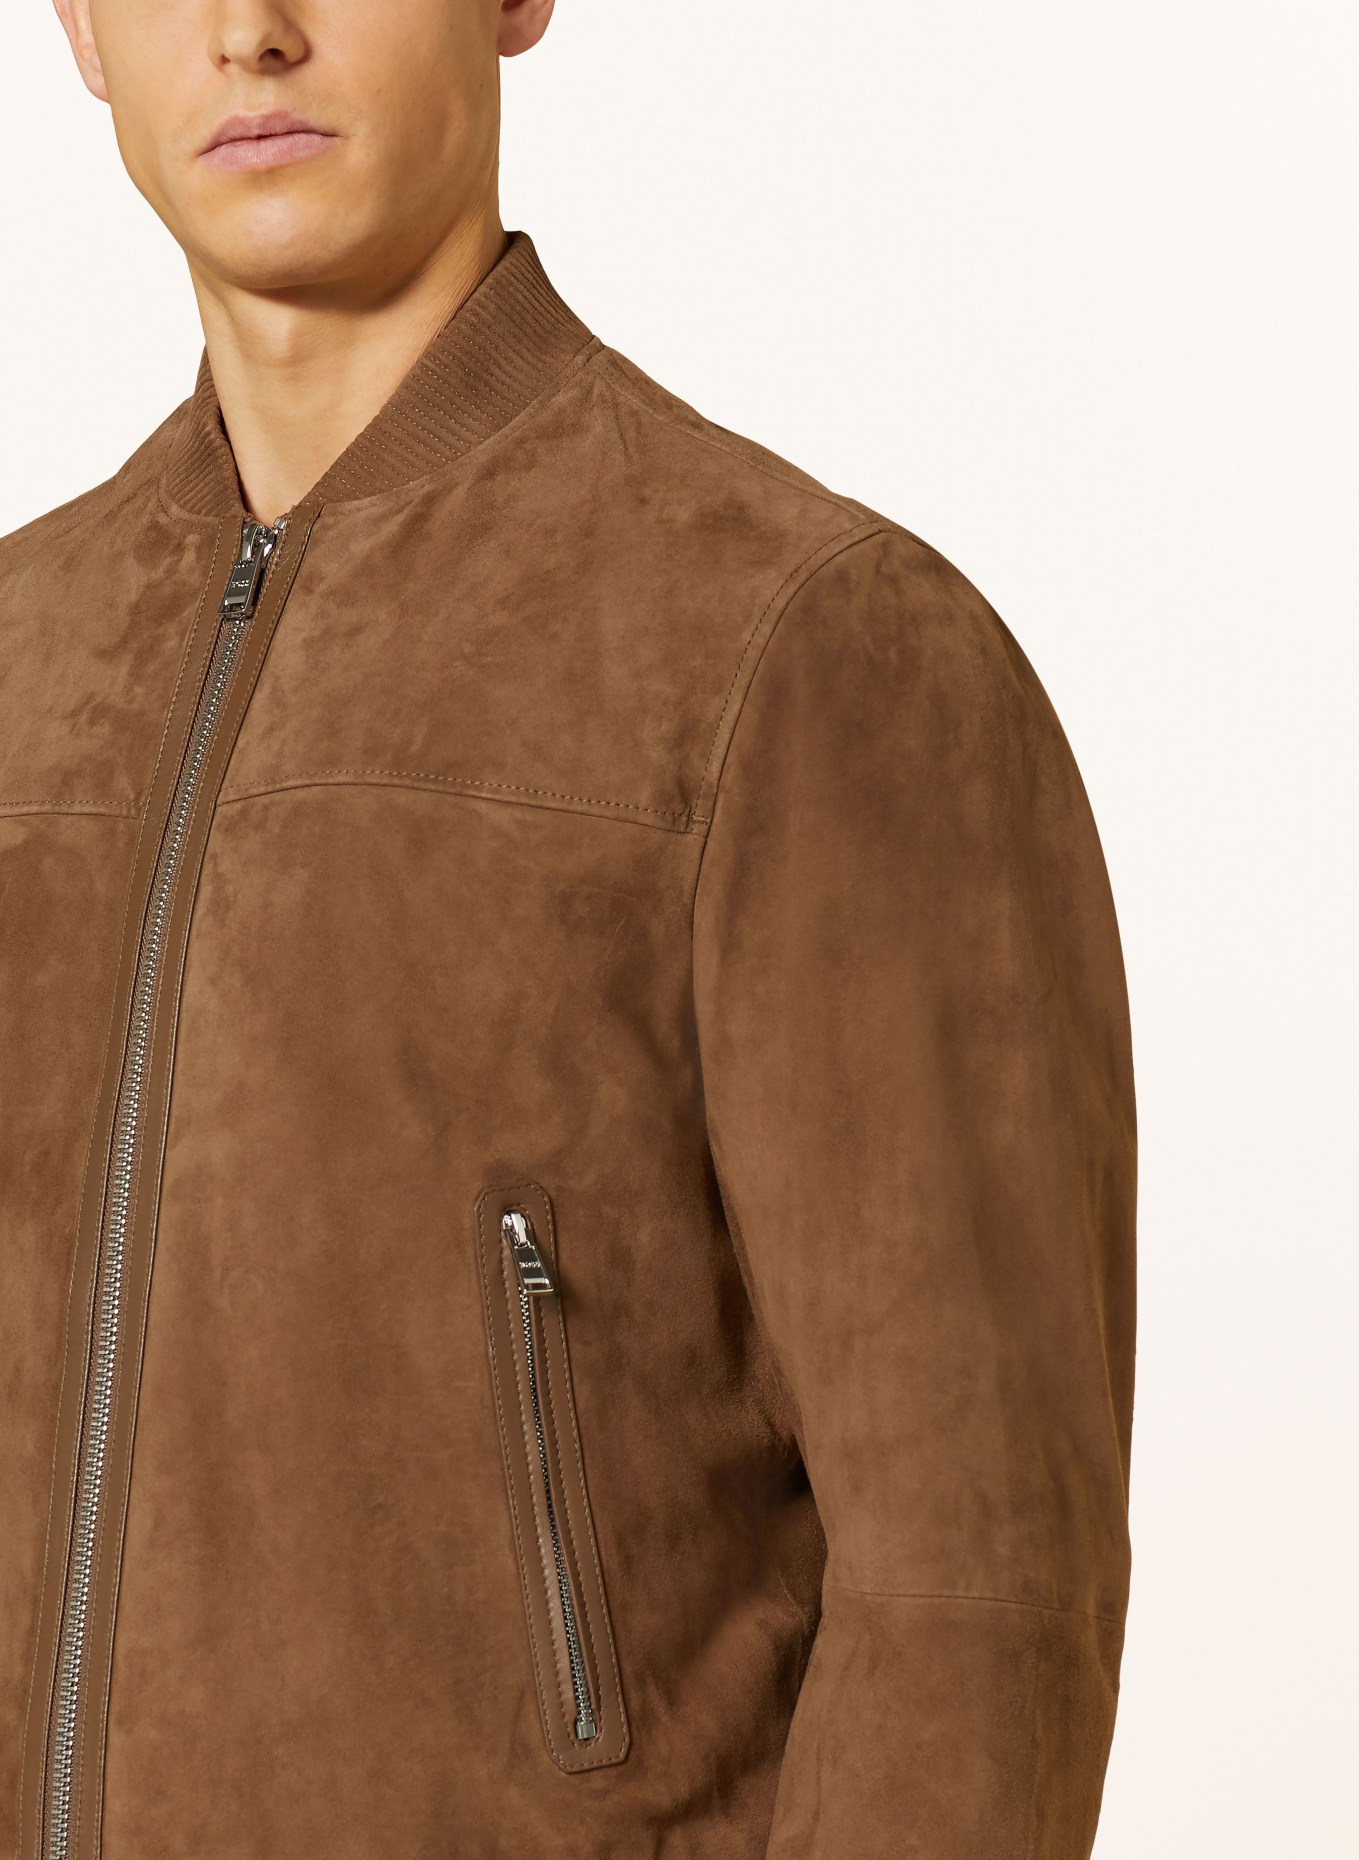 BOSS Ribbed Edging Suede Jacket in Brown for Men